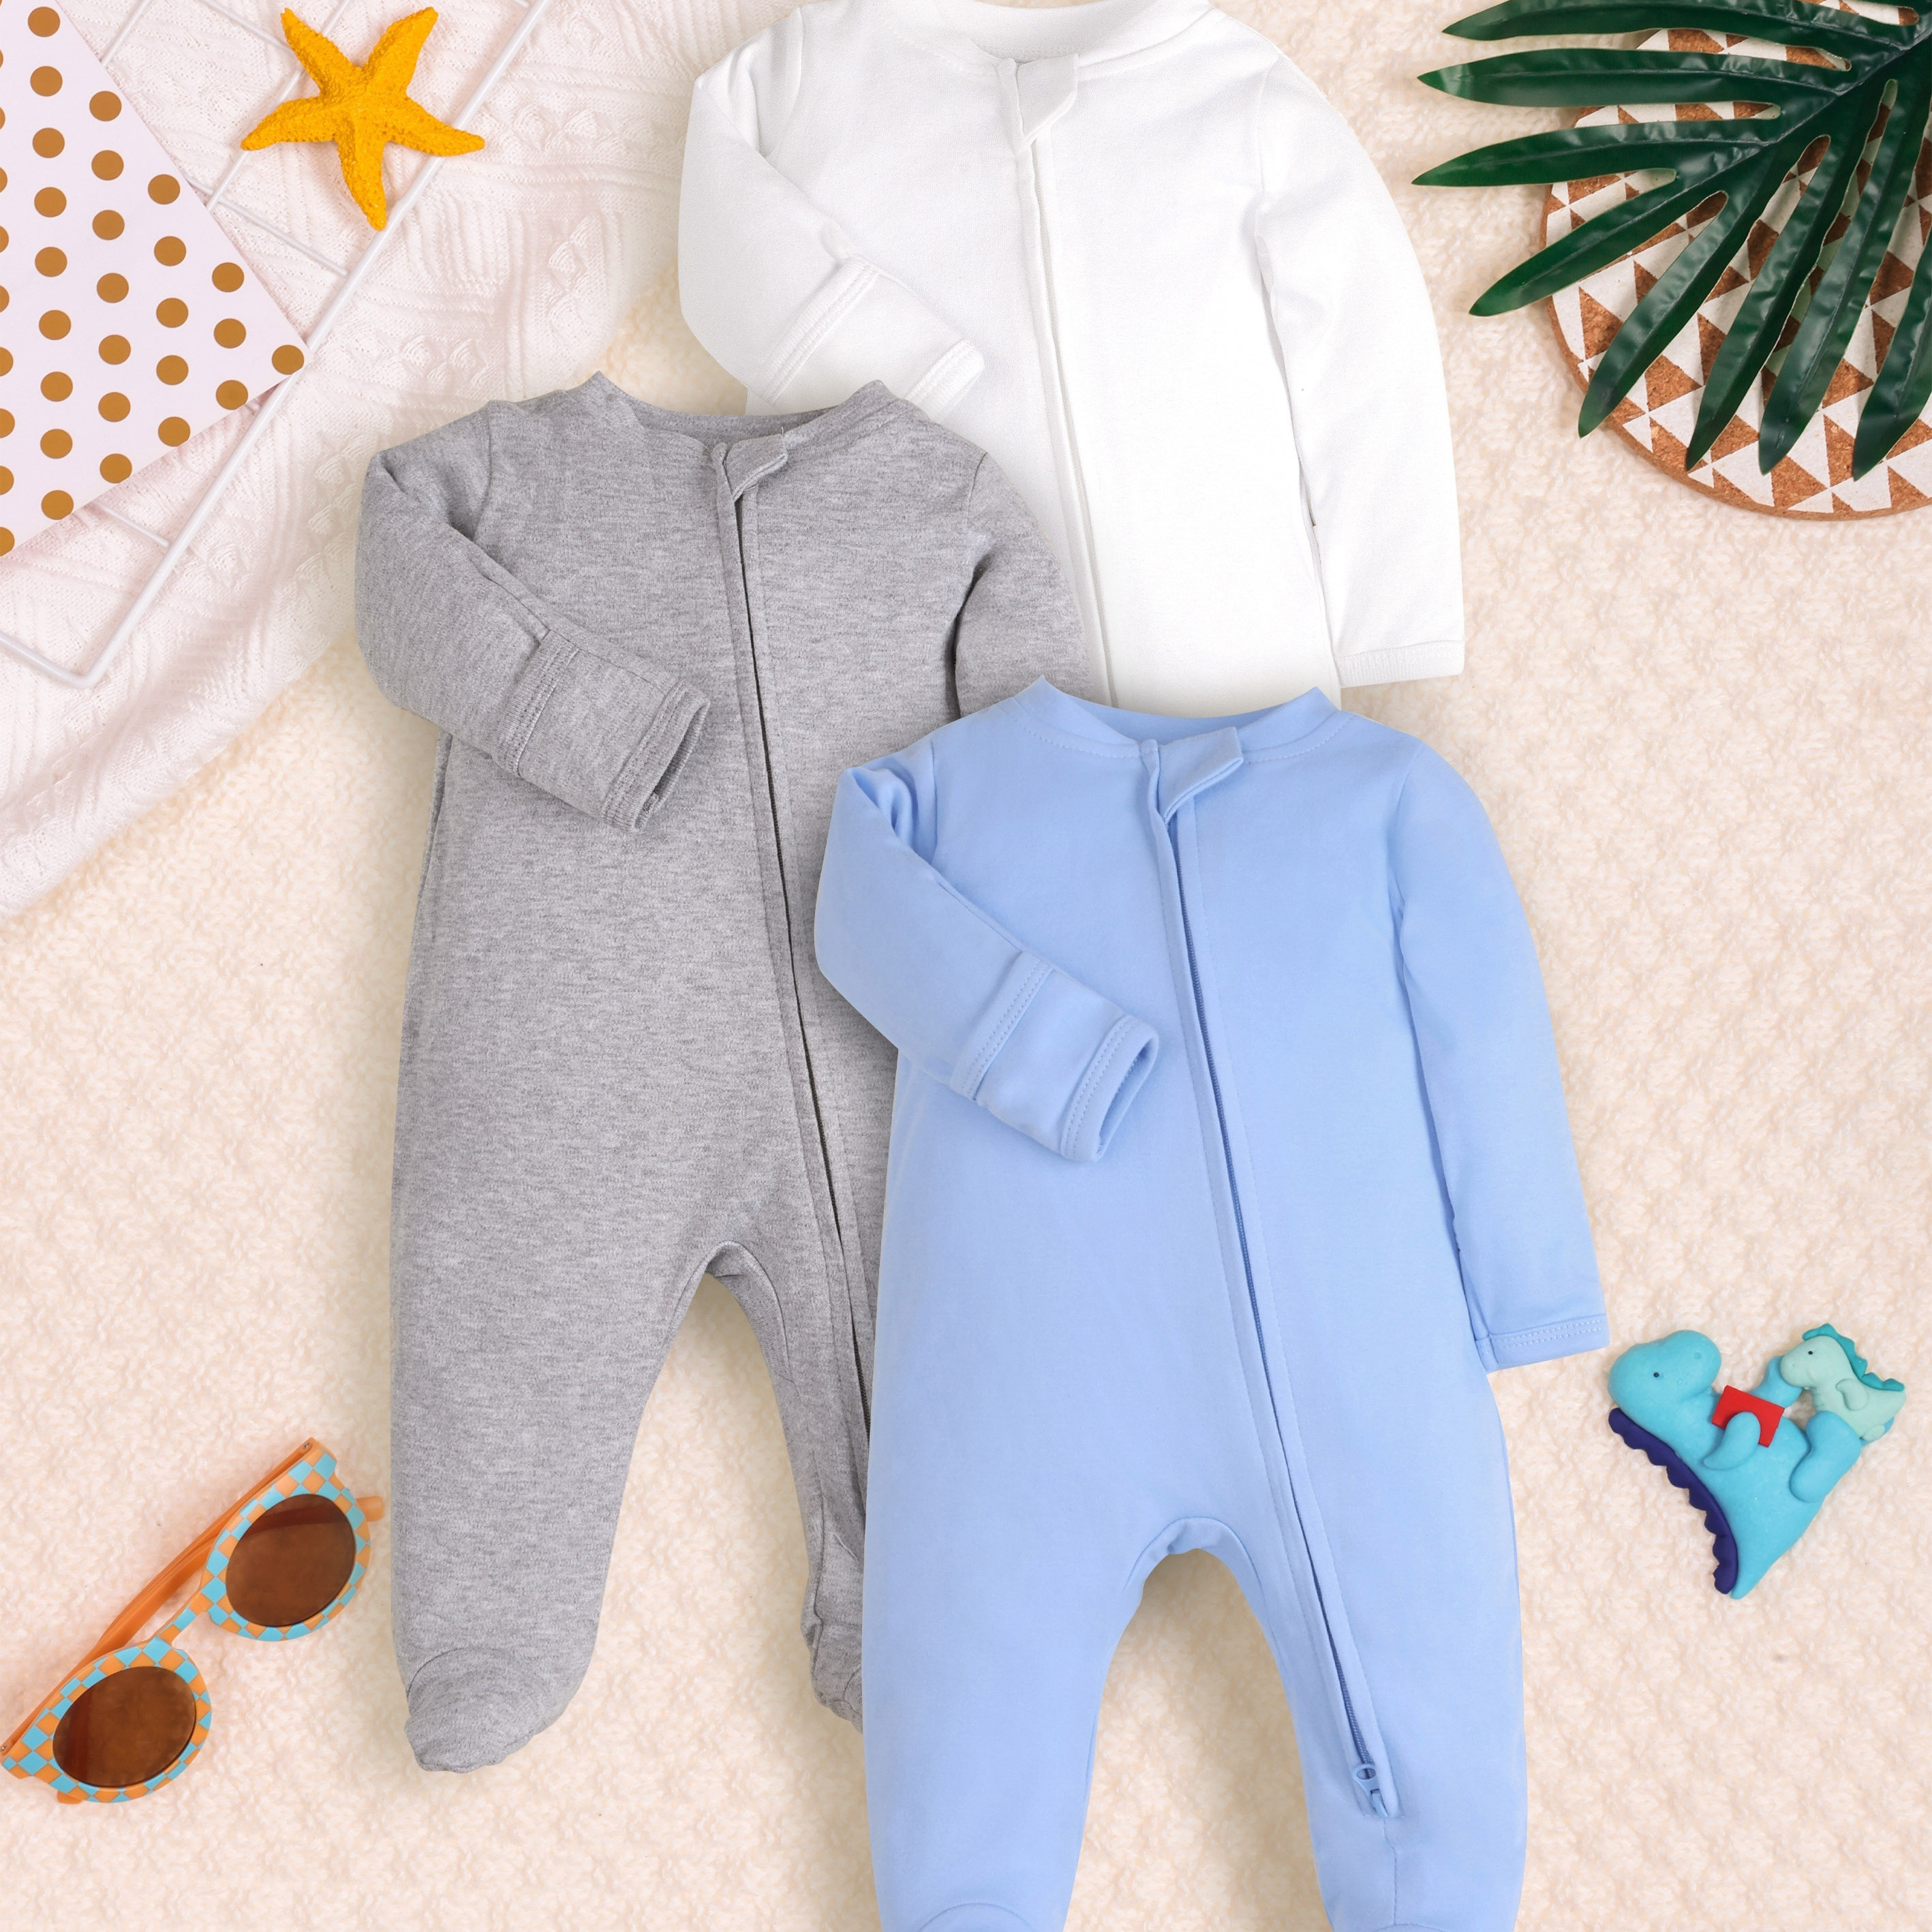 

3pcs Baby Boy's 100% Cotton Long Sleeve Footed Onesie Set, Baby Rompers, Dual Zipper And Scratch-proof Mittens Design, Classic Blue, White, Gray Style